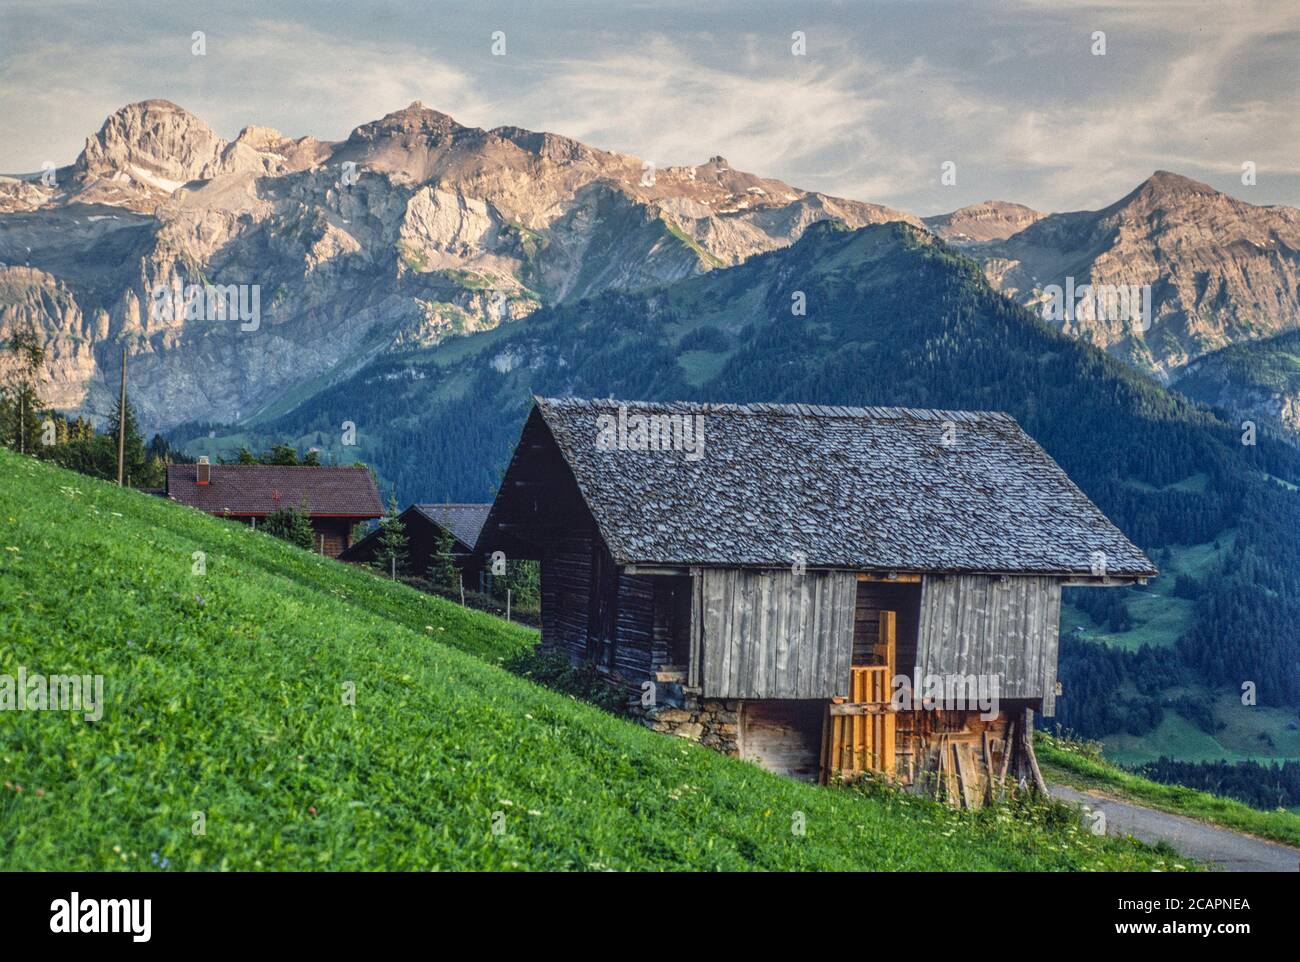 Archive image: Farm building in high pasture with distant mountains, Switzerland, possibly above Gstaad, 1995. Stock Photo